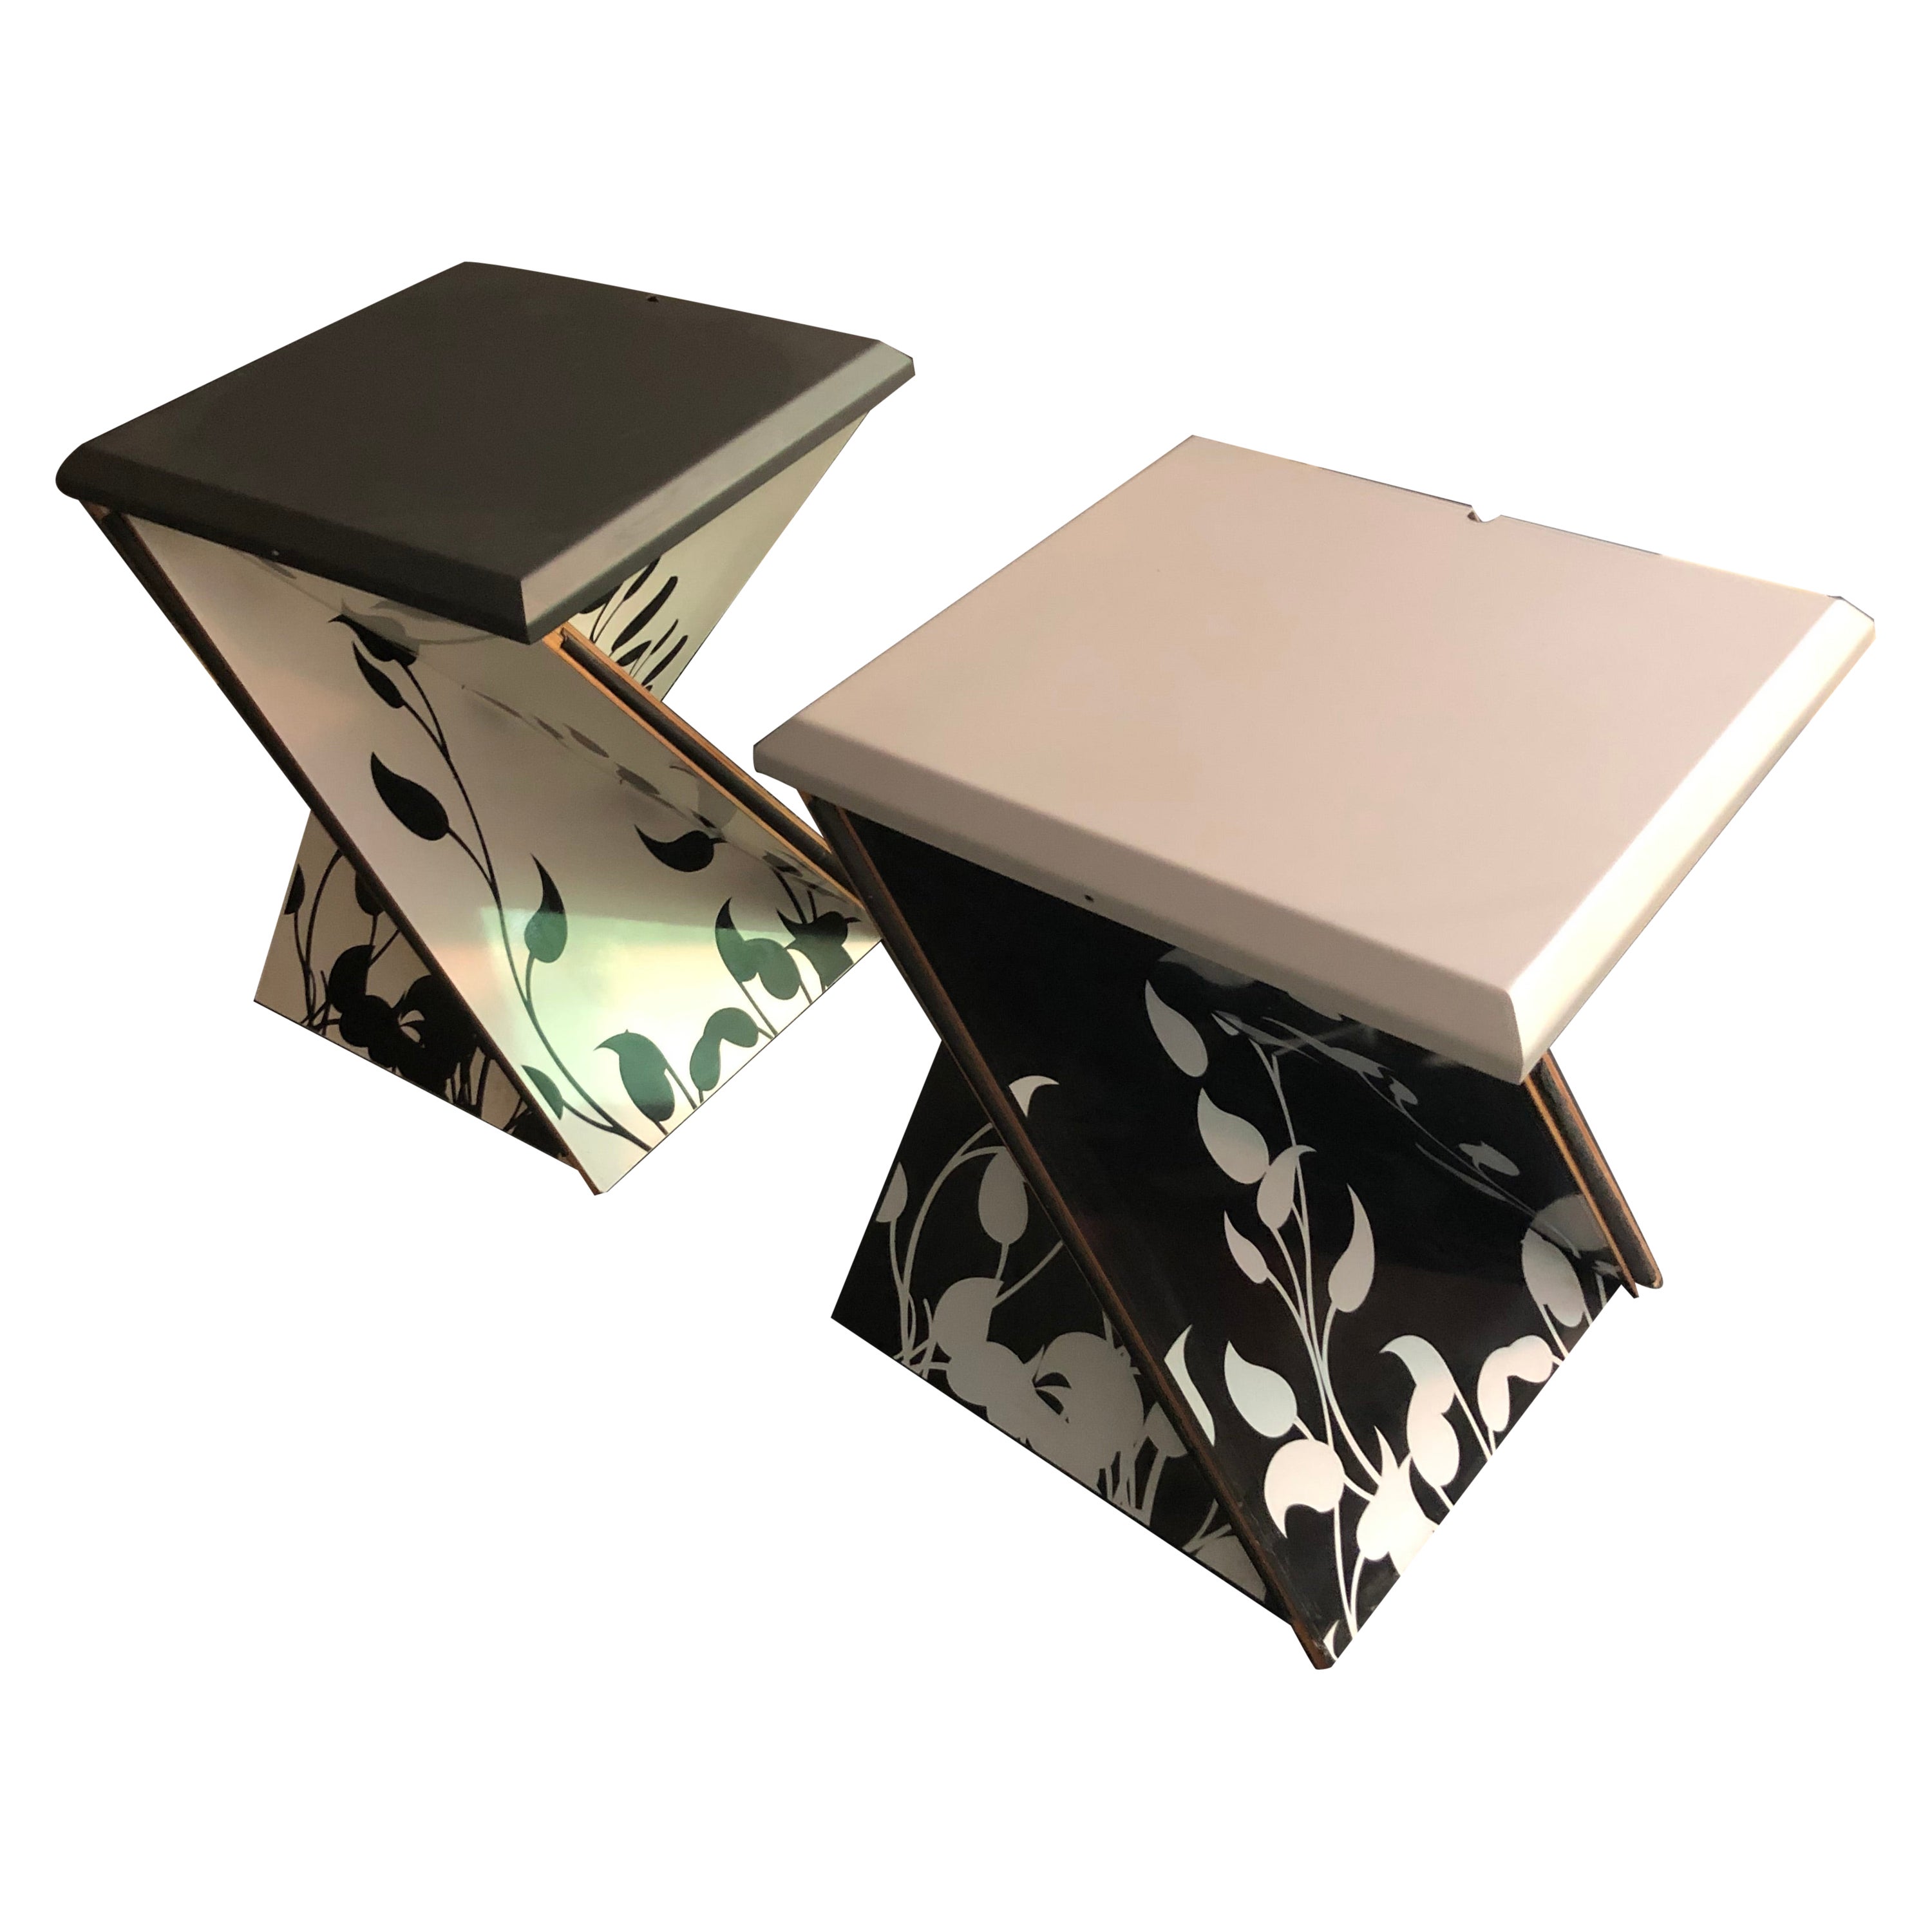 Pair of Modern Kada Metal Folding Square Danese Milano End Tables or Stools For Sale